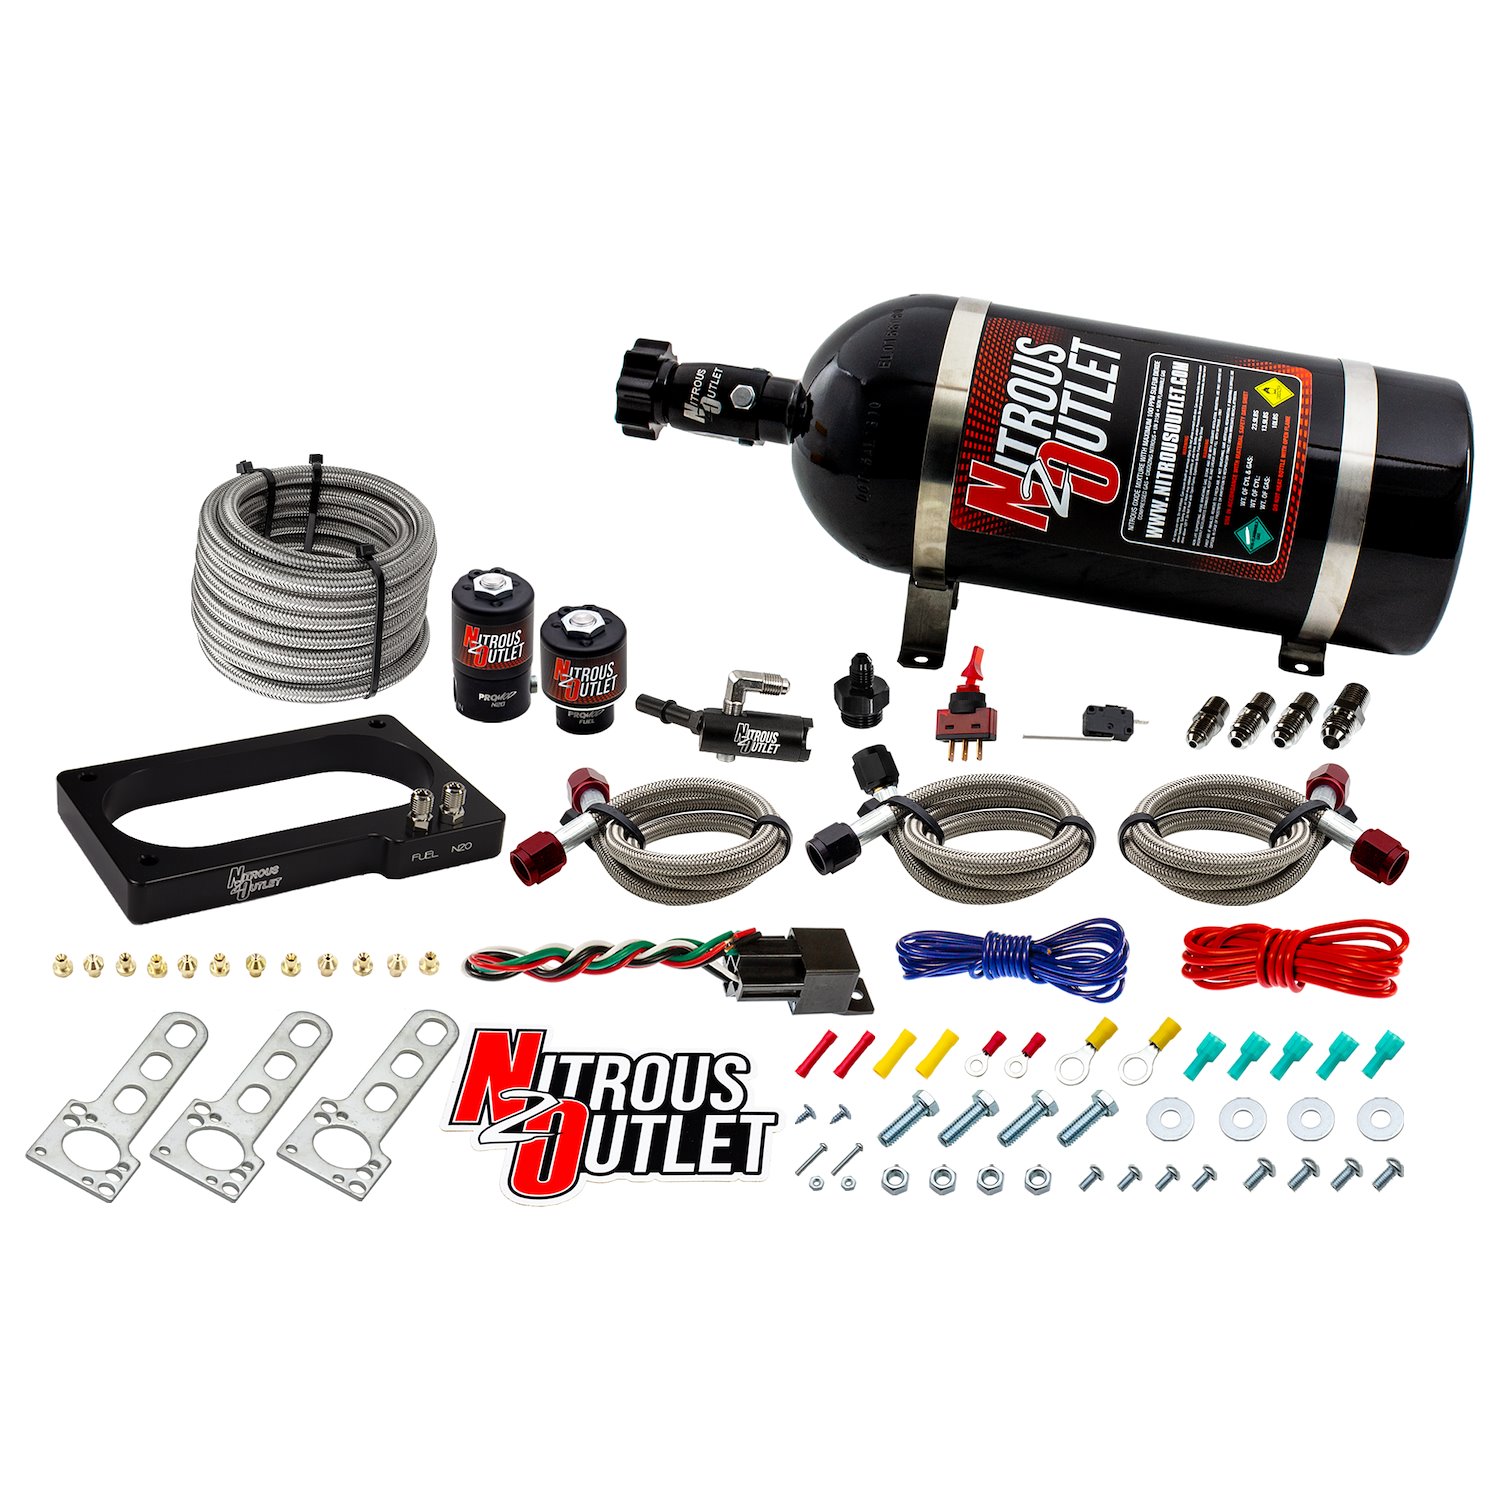 00-10152-10 Ford 2007-2014 GT 500 Mustang Plate System, Gas/E85, 5-55psi, 50-200HP, 10lb Bottle